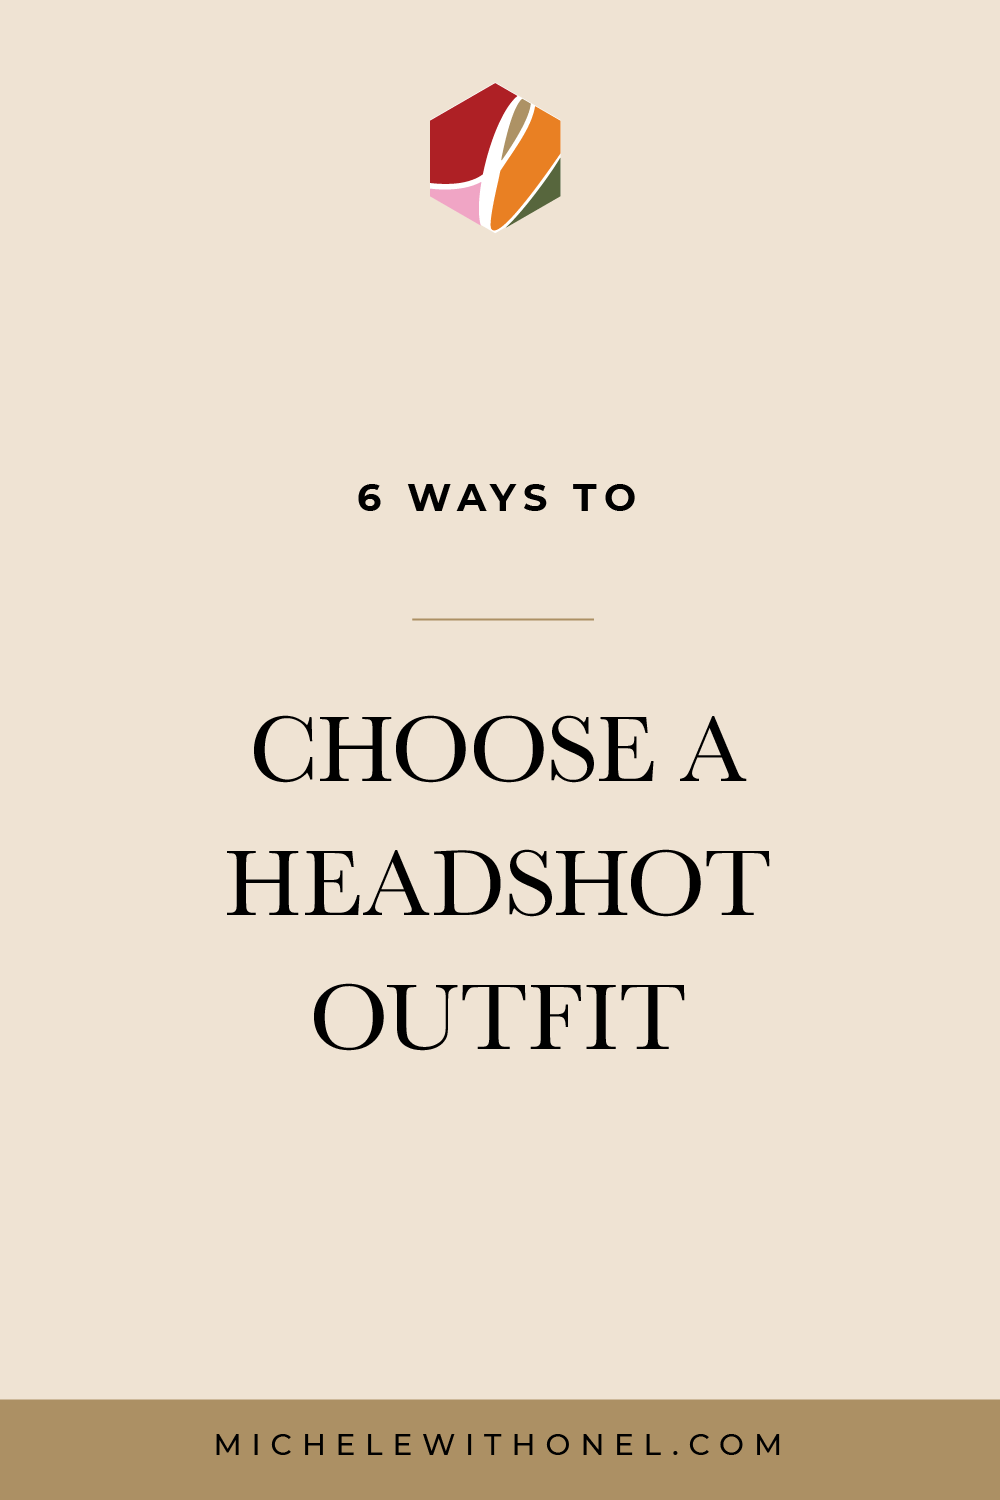 Ever struggle with what to wear for your headshot session? If so, these headshot tips are for for you! Start reading to find out what color to wear, what sleeve length works best, how much makeup to wear, and more! #headshots #whattowear #businessheadshots #wardrobe